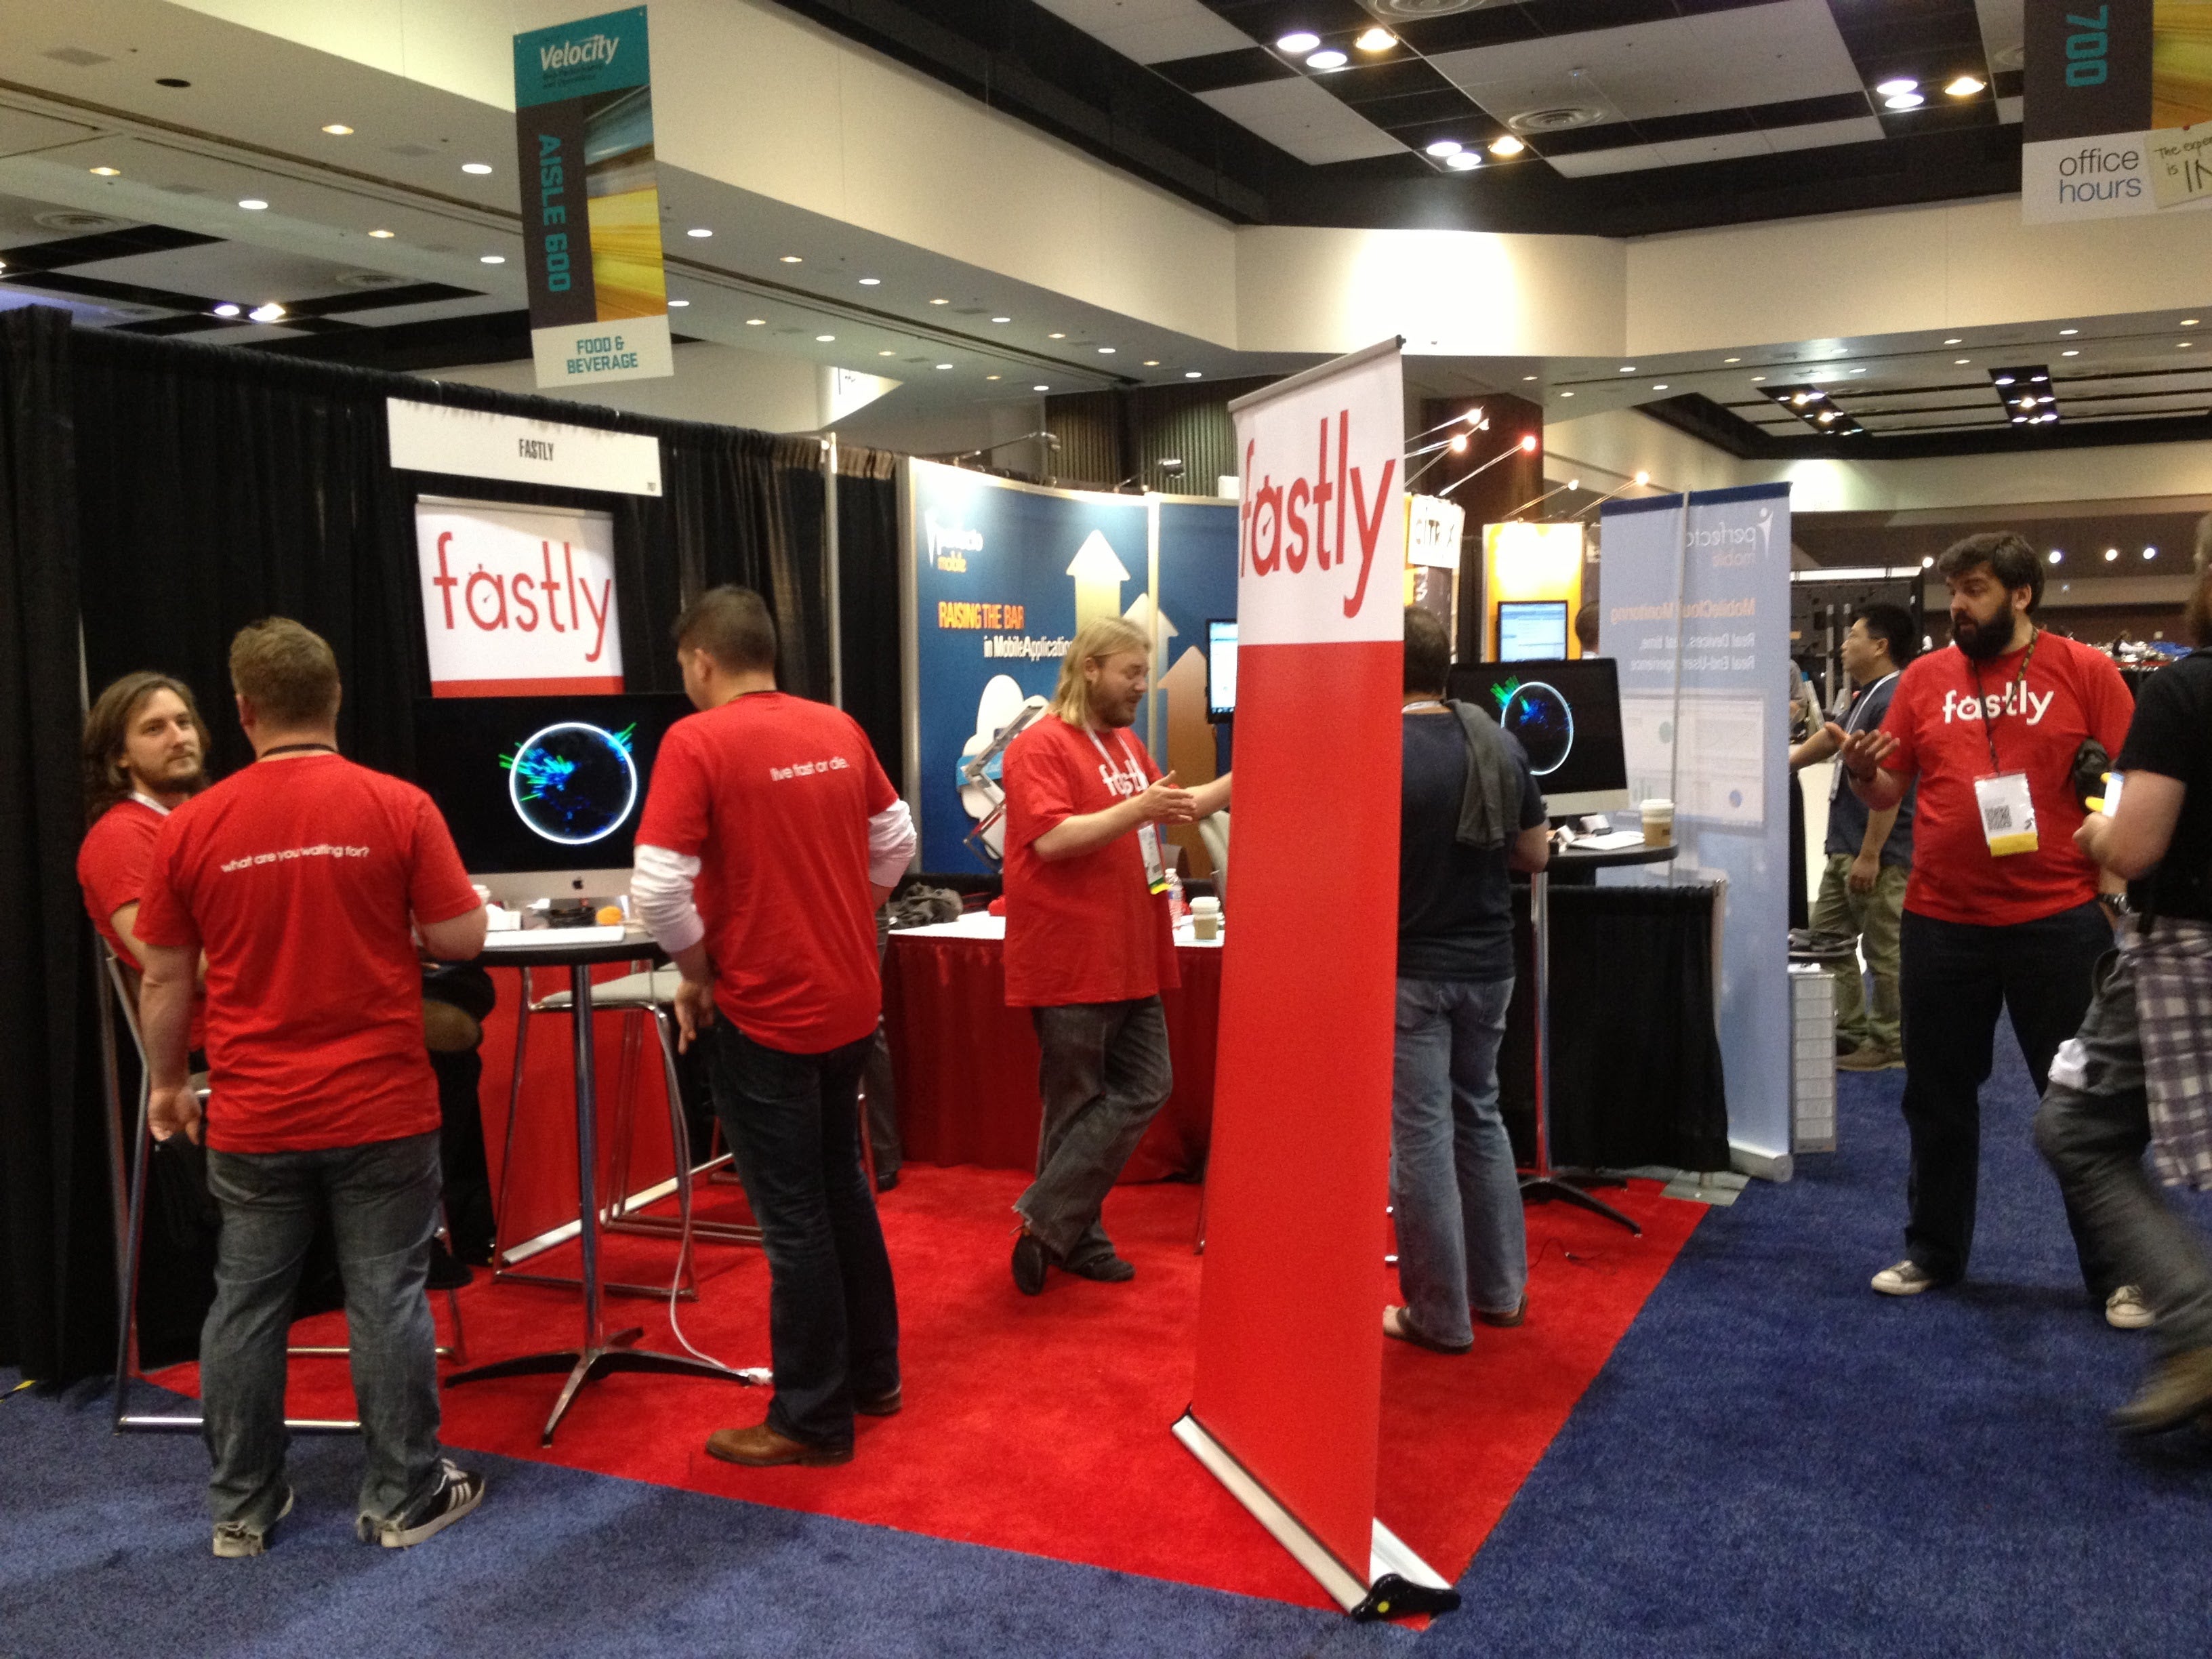 The Fastly team staffs a booth at Velocity conference.  